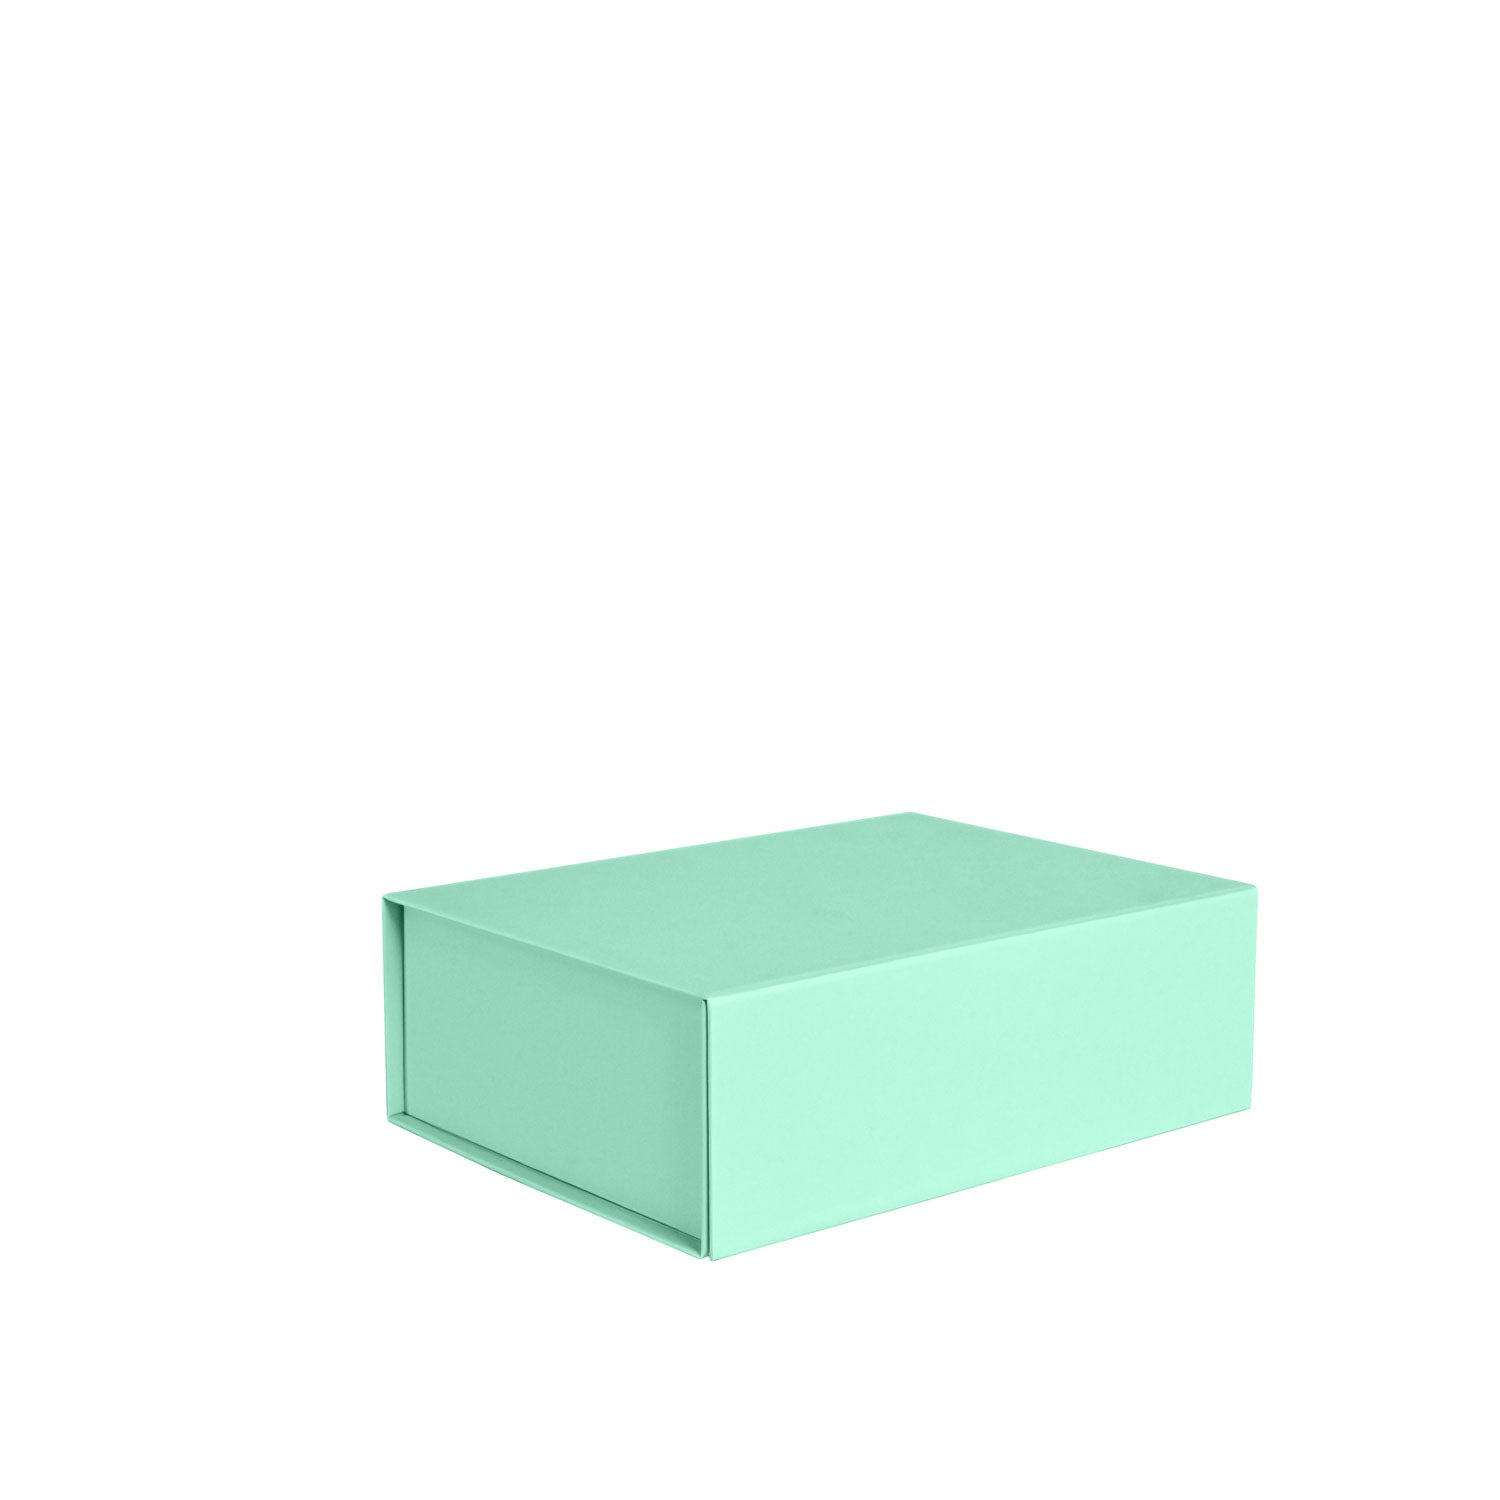 High Quality Mint Green Small Gift Box - NEON Packaging